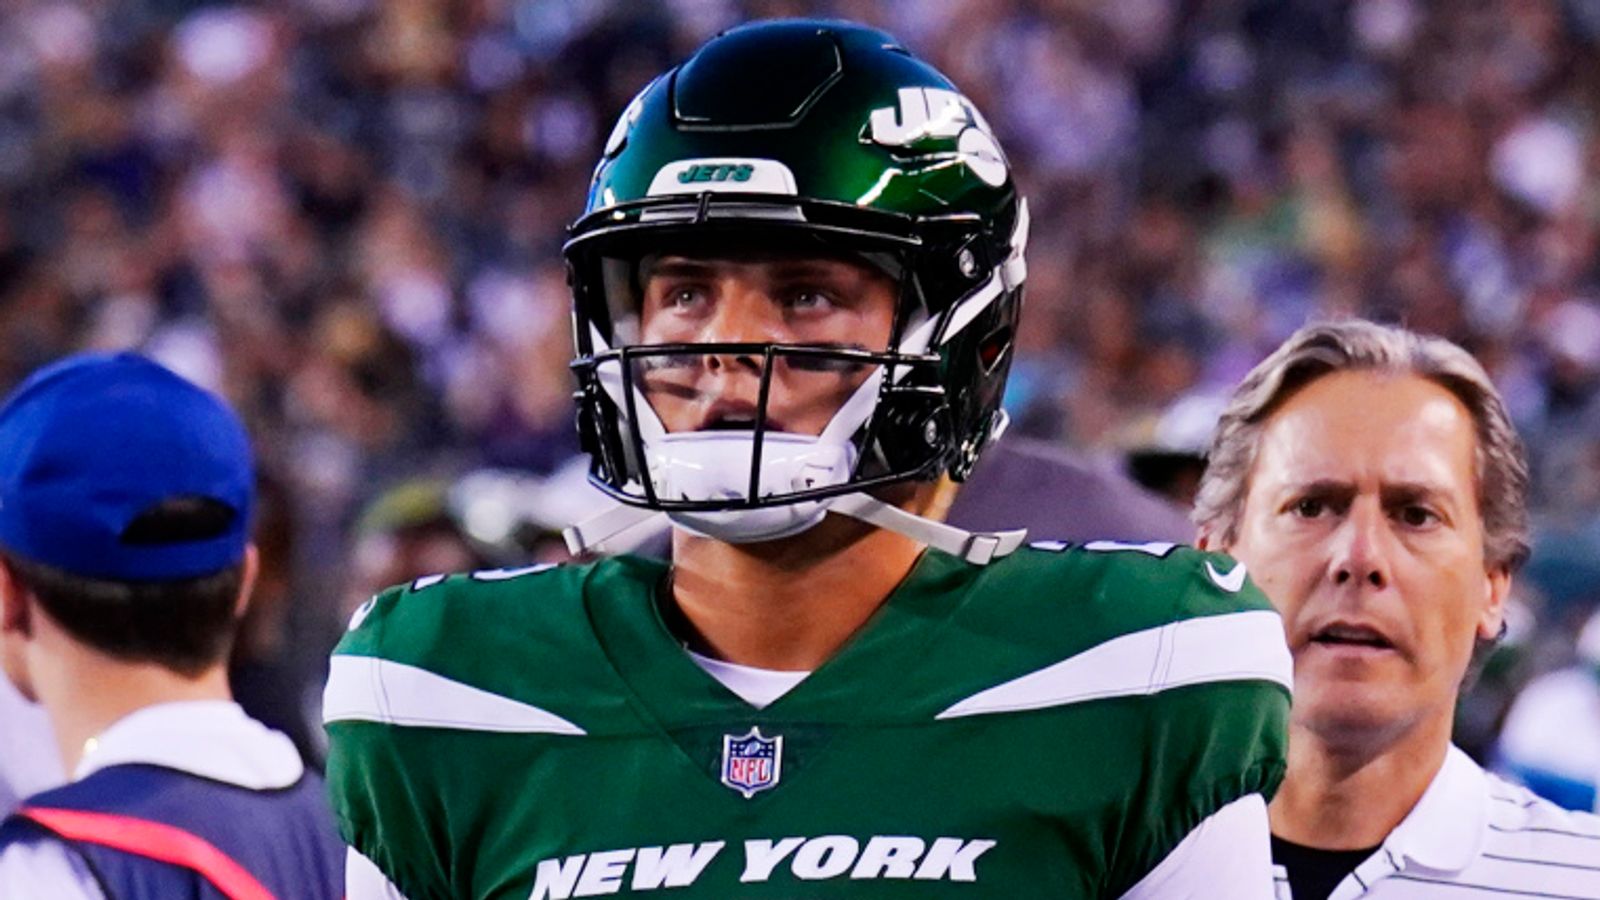 Zach Wilson: New York Jets quarterback injures knee in preseason and is a doubt for start of 2022 season